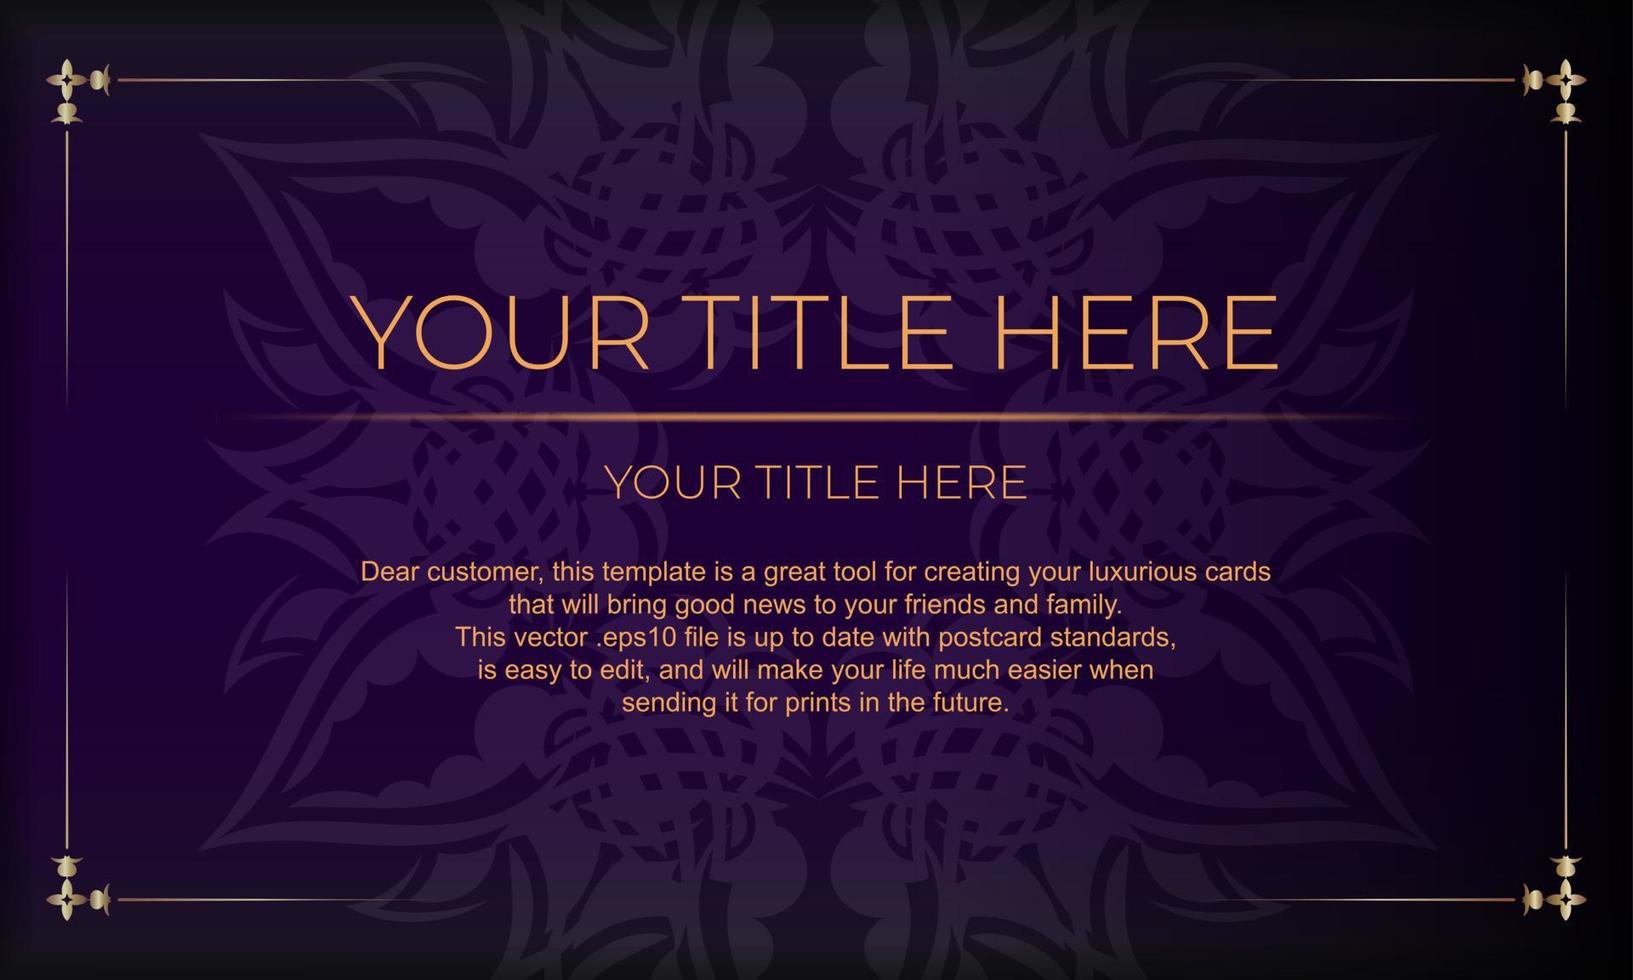 Purple luxury background with abstract ornament. Elegant and classic vector elements ready for print and typography.